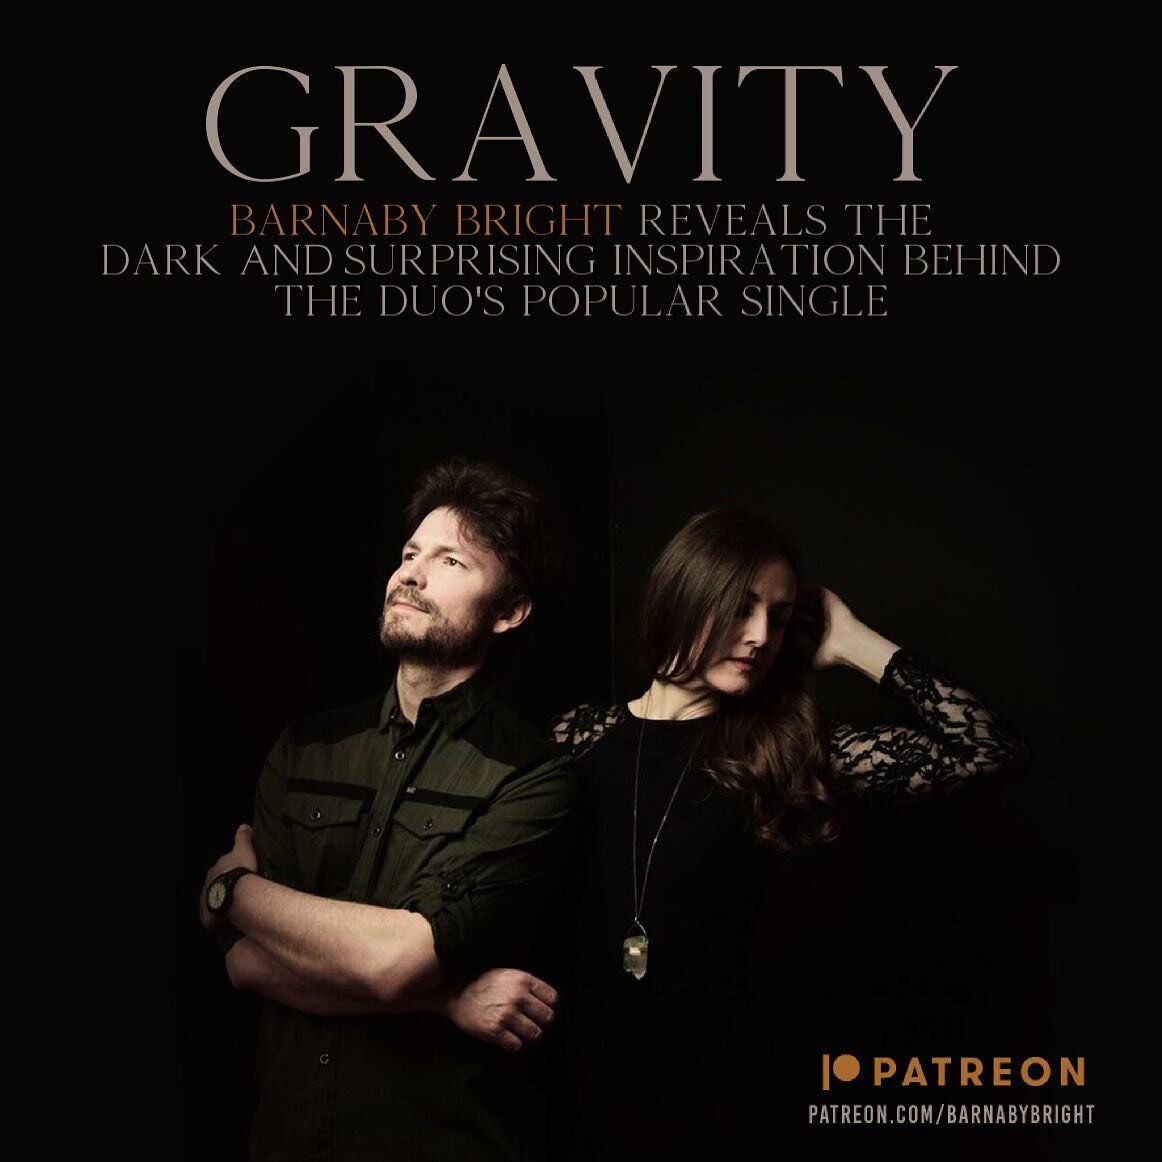 Yesterday, over on our @patreon page, we shared the REAL story behind our song &ldquo;Gravity.&rdquo; It&rsquo;s not actually a breakup song as many may believe. 
It&rsquo;s something we&rsquo;ve kept to ourselves all these years, but felt Patreon wa